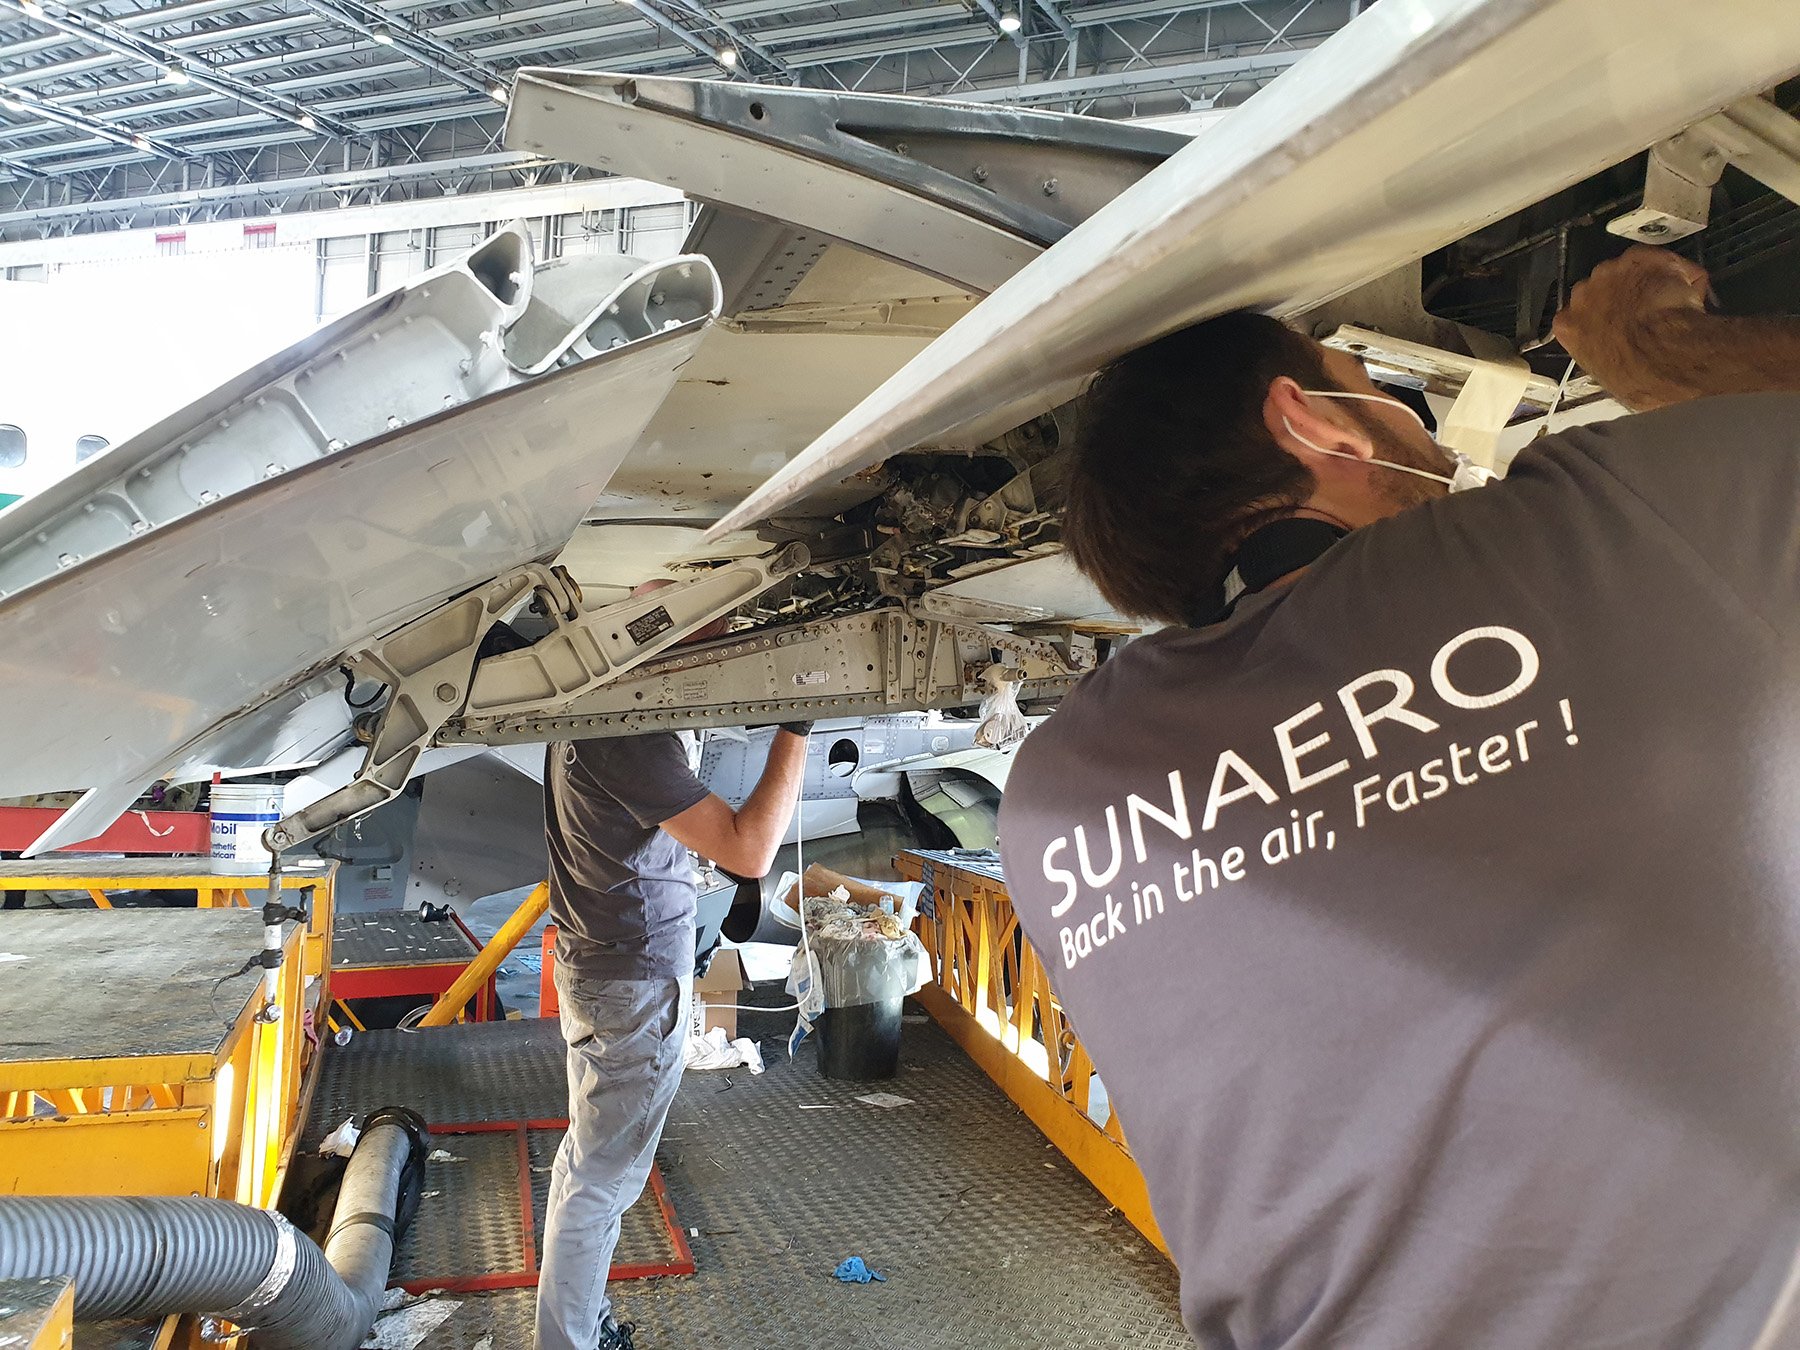 WE ARE ANNOUNCING OUR PARTNERSHIP WITH SUNAERO